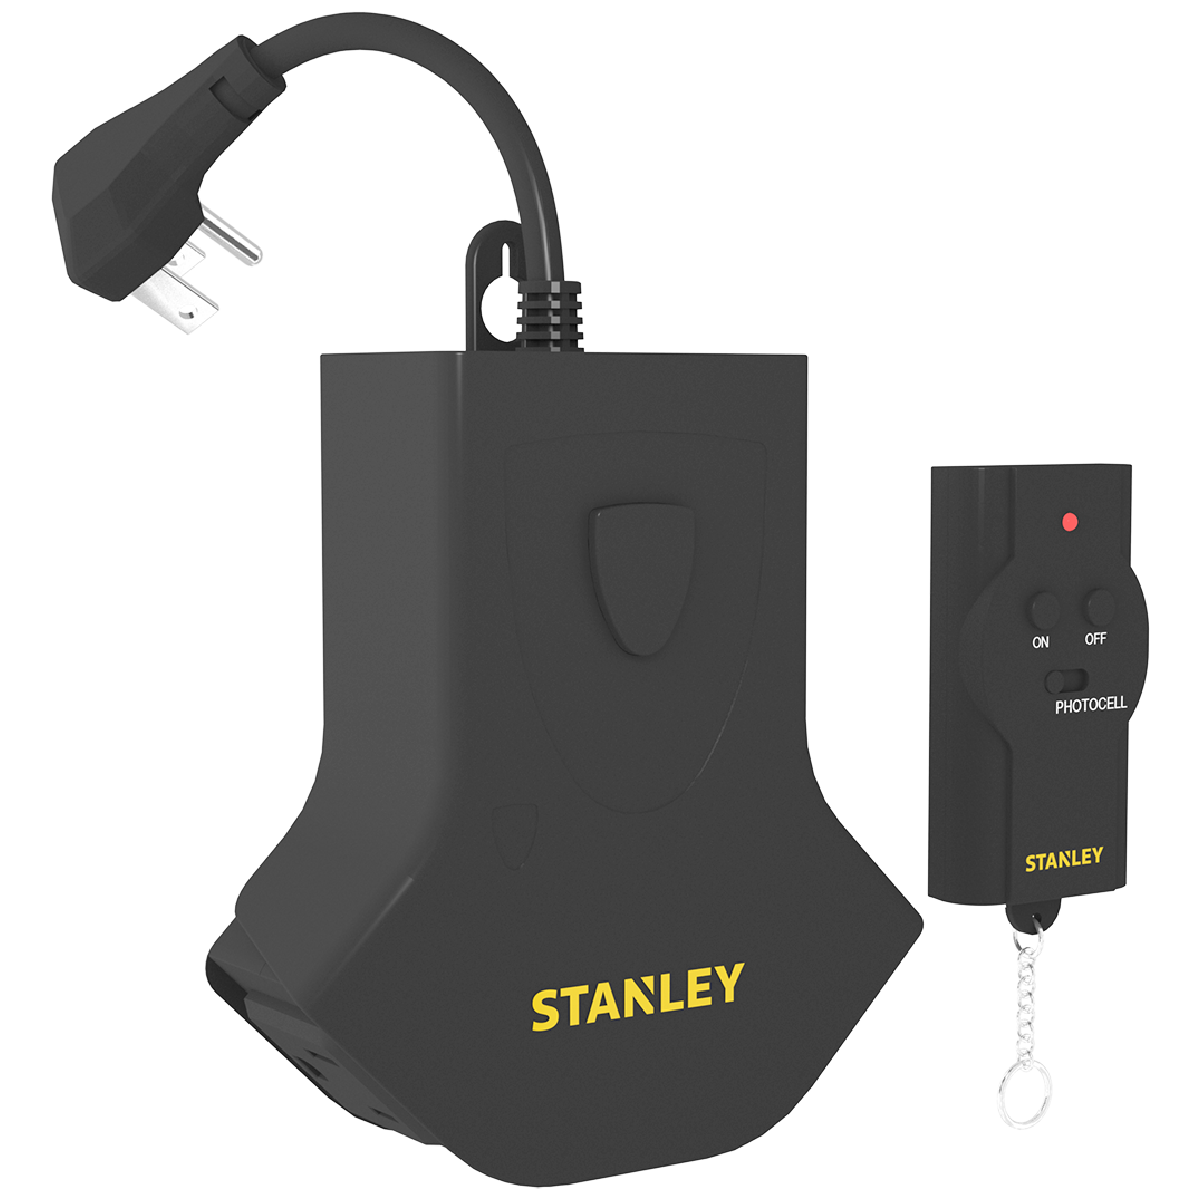 STANLEY REMOTE CONTROL POWER HUB - Stanley Electrical Accessories